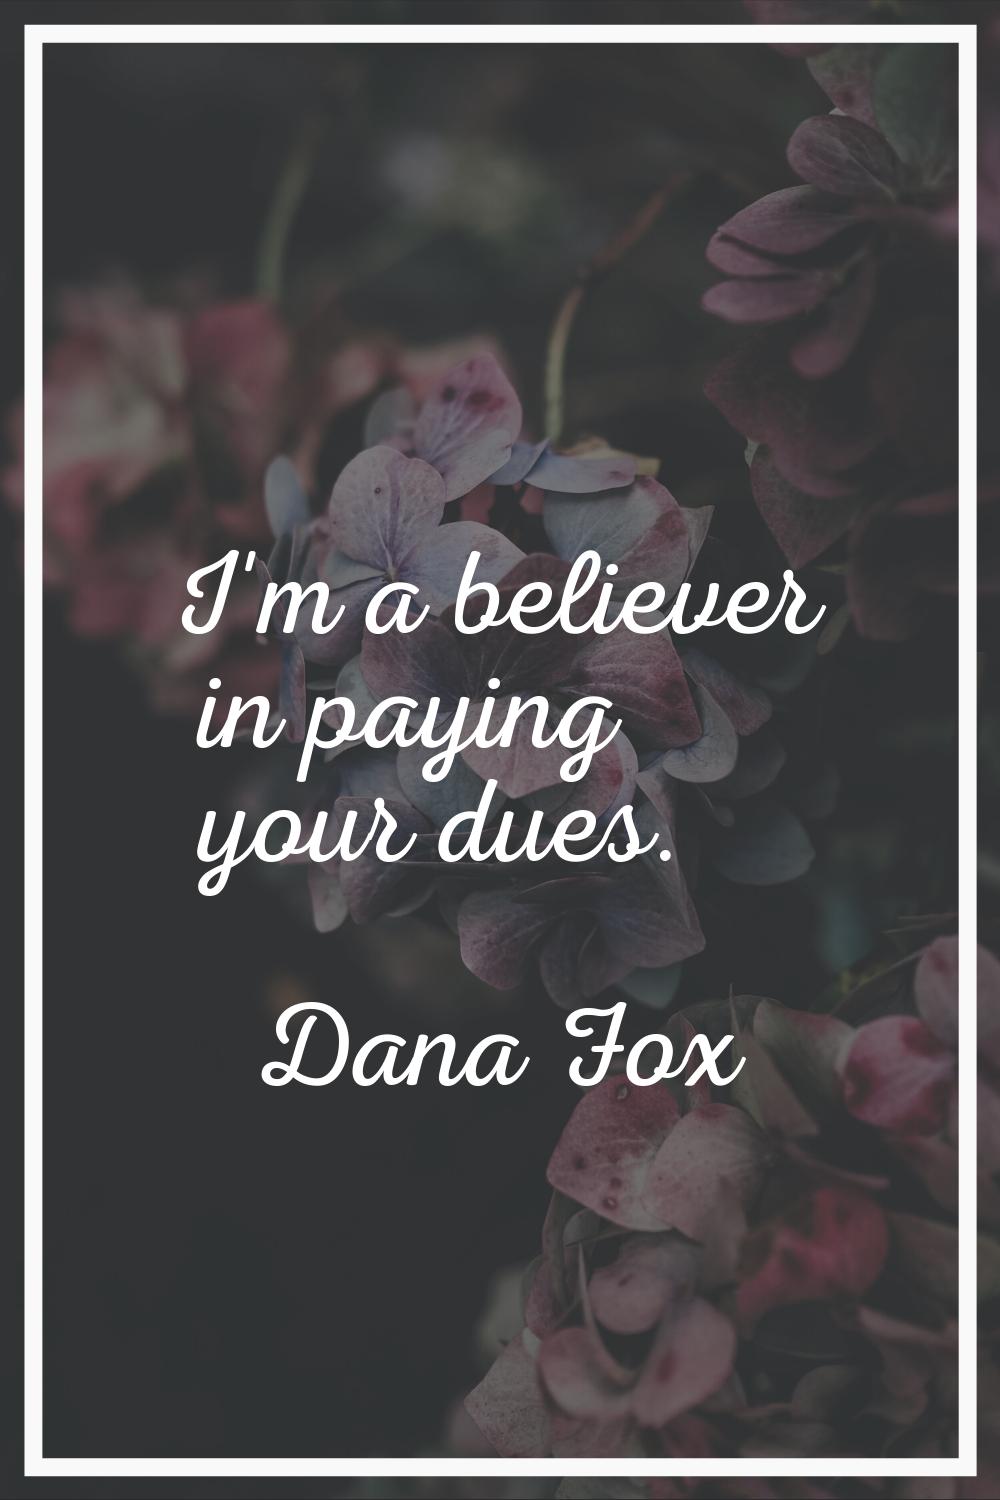 I'm a believer in paying your dues.